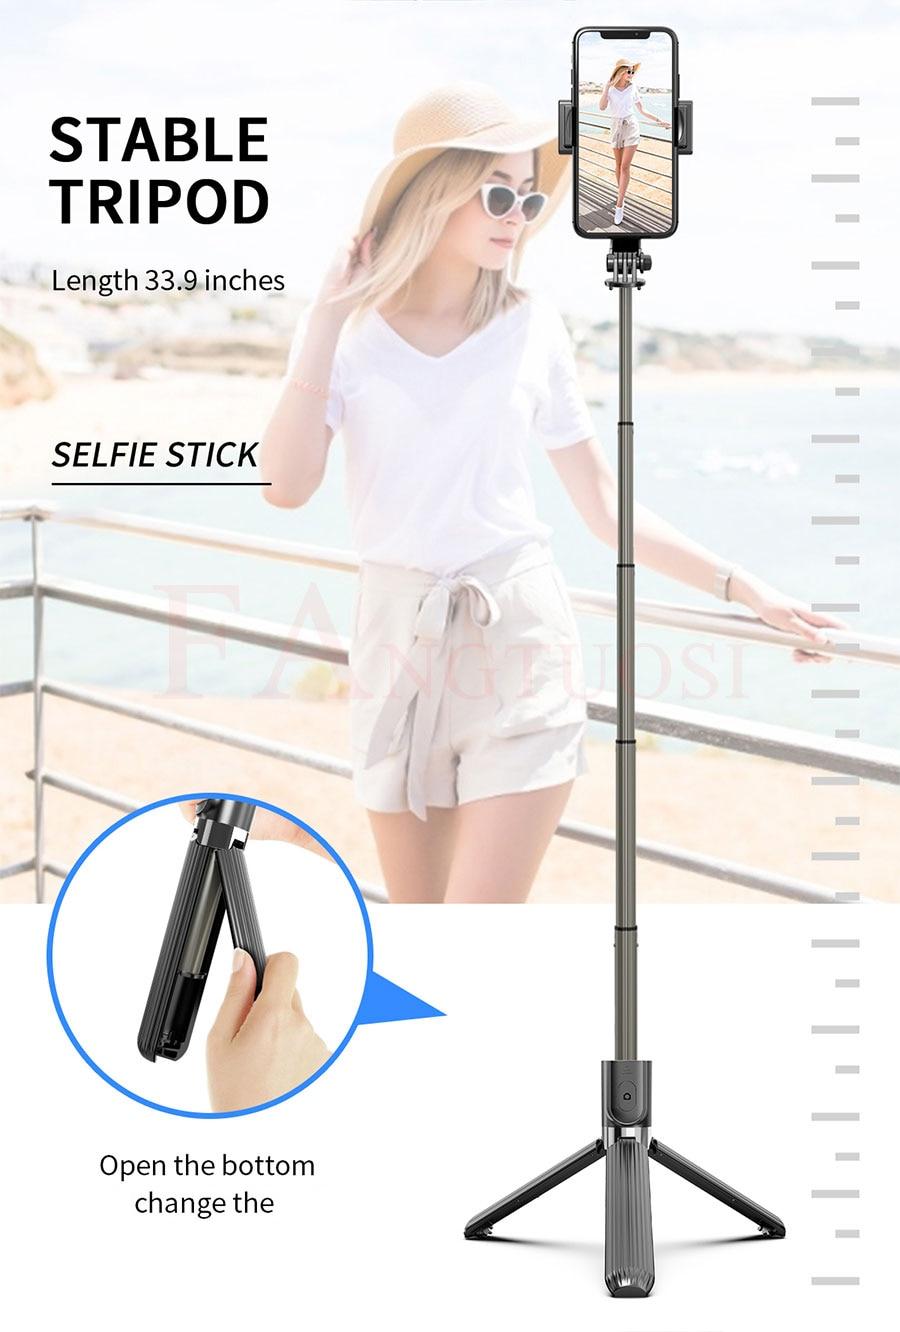 FANGTUOSI Bluetooth Handheld Gimbal Stabilizer Mobile Phone Selfie Stick Holder Adjustable Selfie Stand For iPhone/Huawei